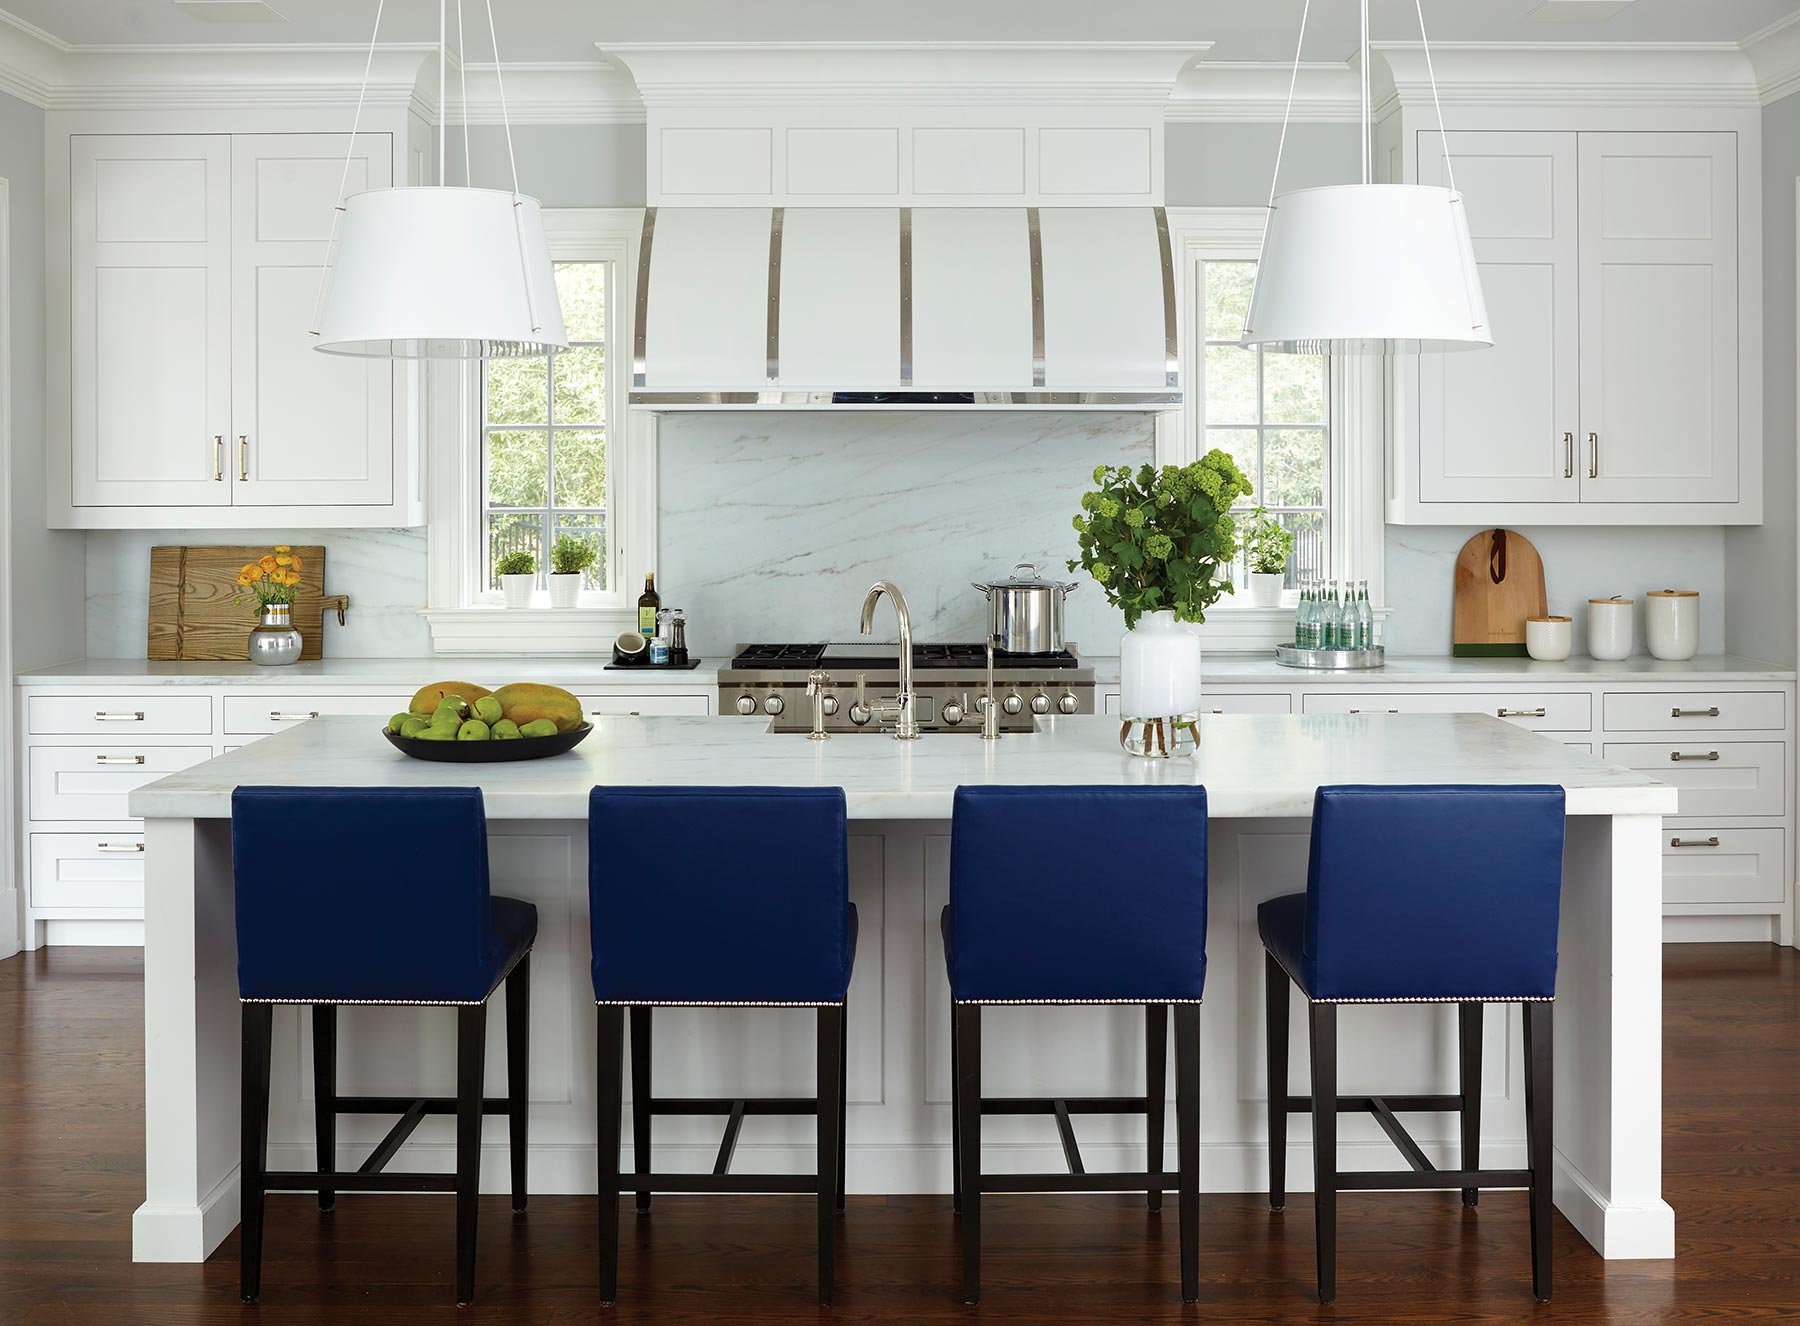 A white kitchen island and stove with a pop of color in the line of blue barstools in front